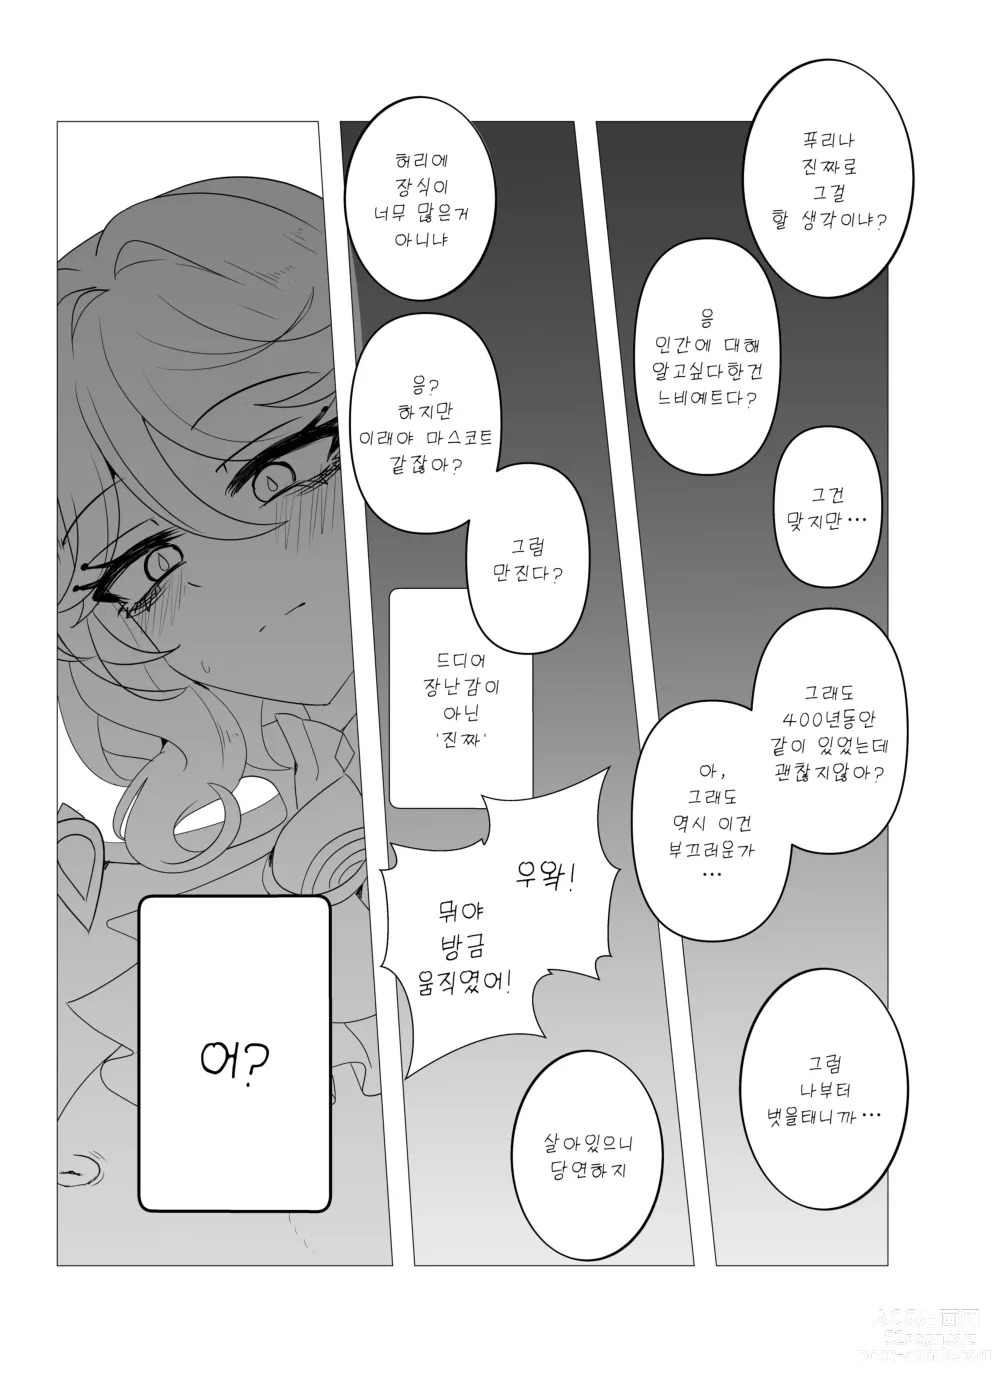 Page 14 of doujinshi Meaningless Time